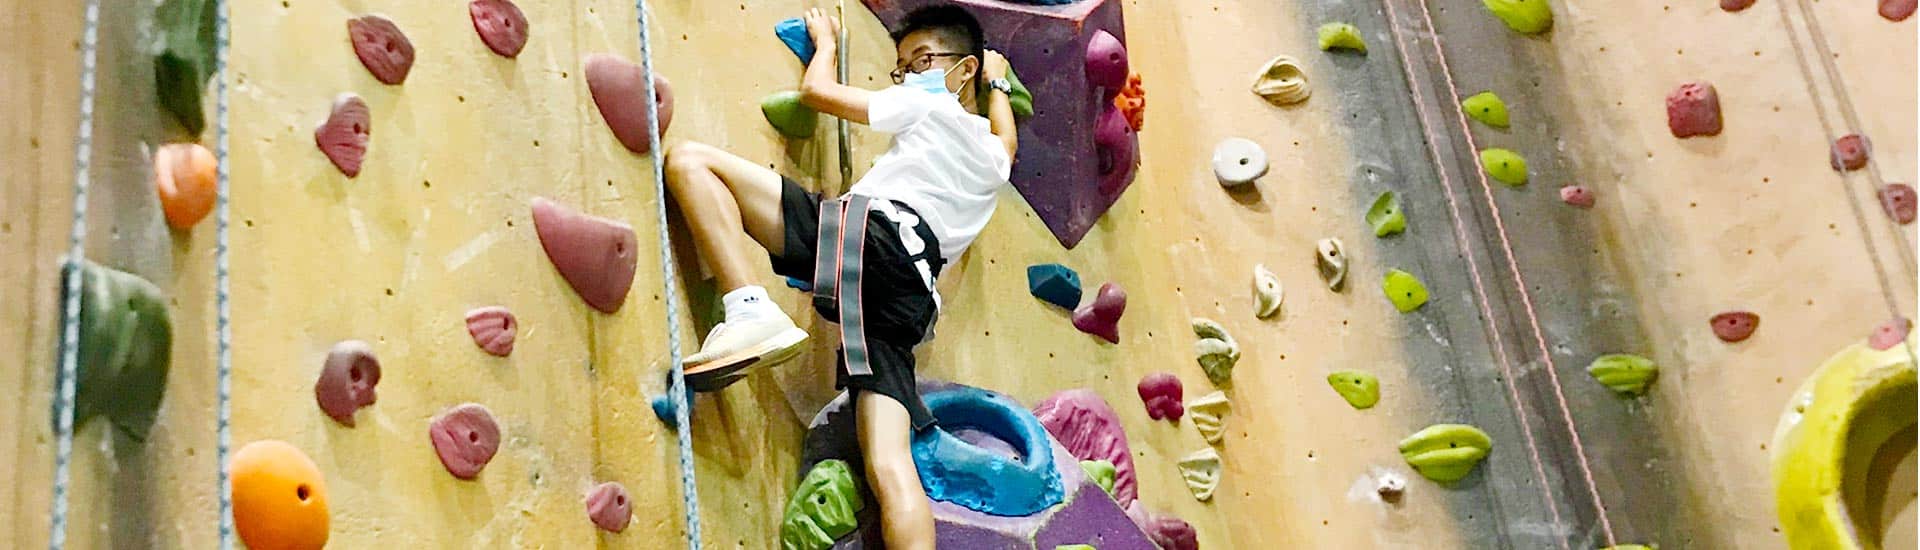 A camper takes on a climbing wall